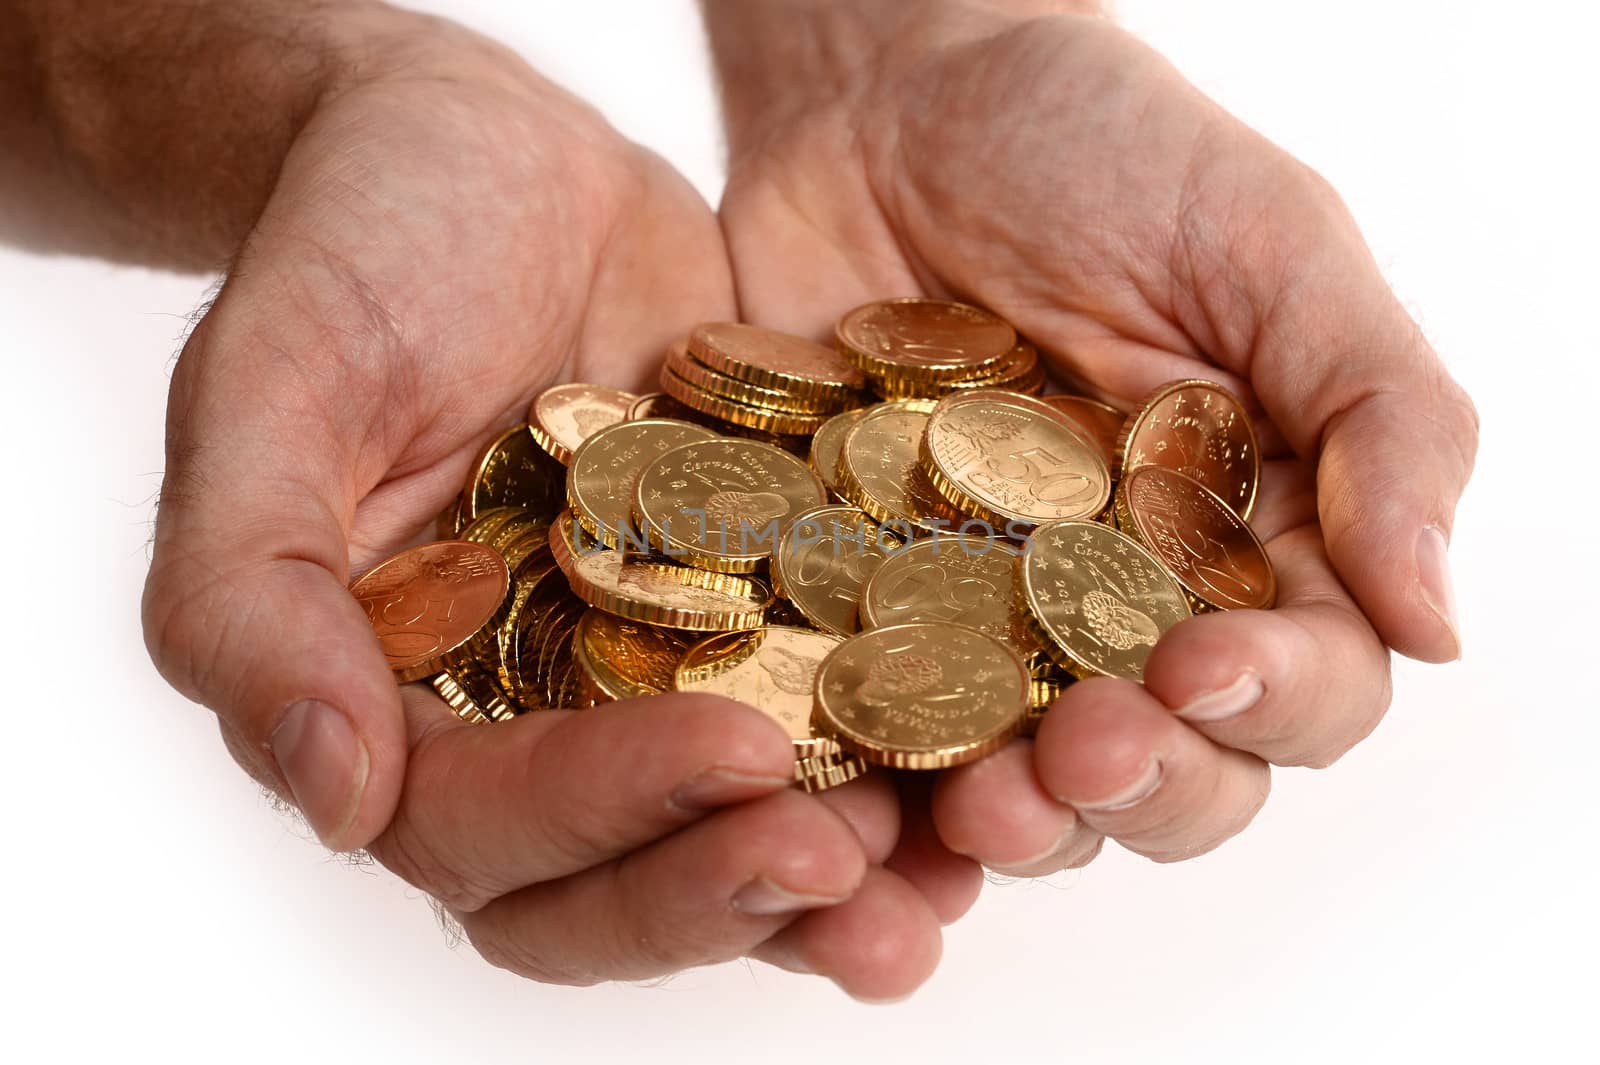 Man hands full of coins by ocusfocus